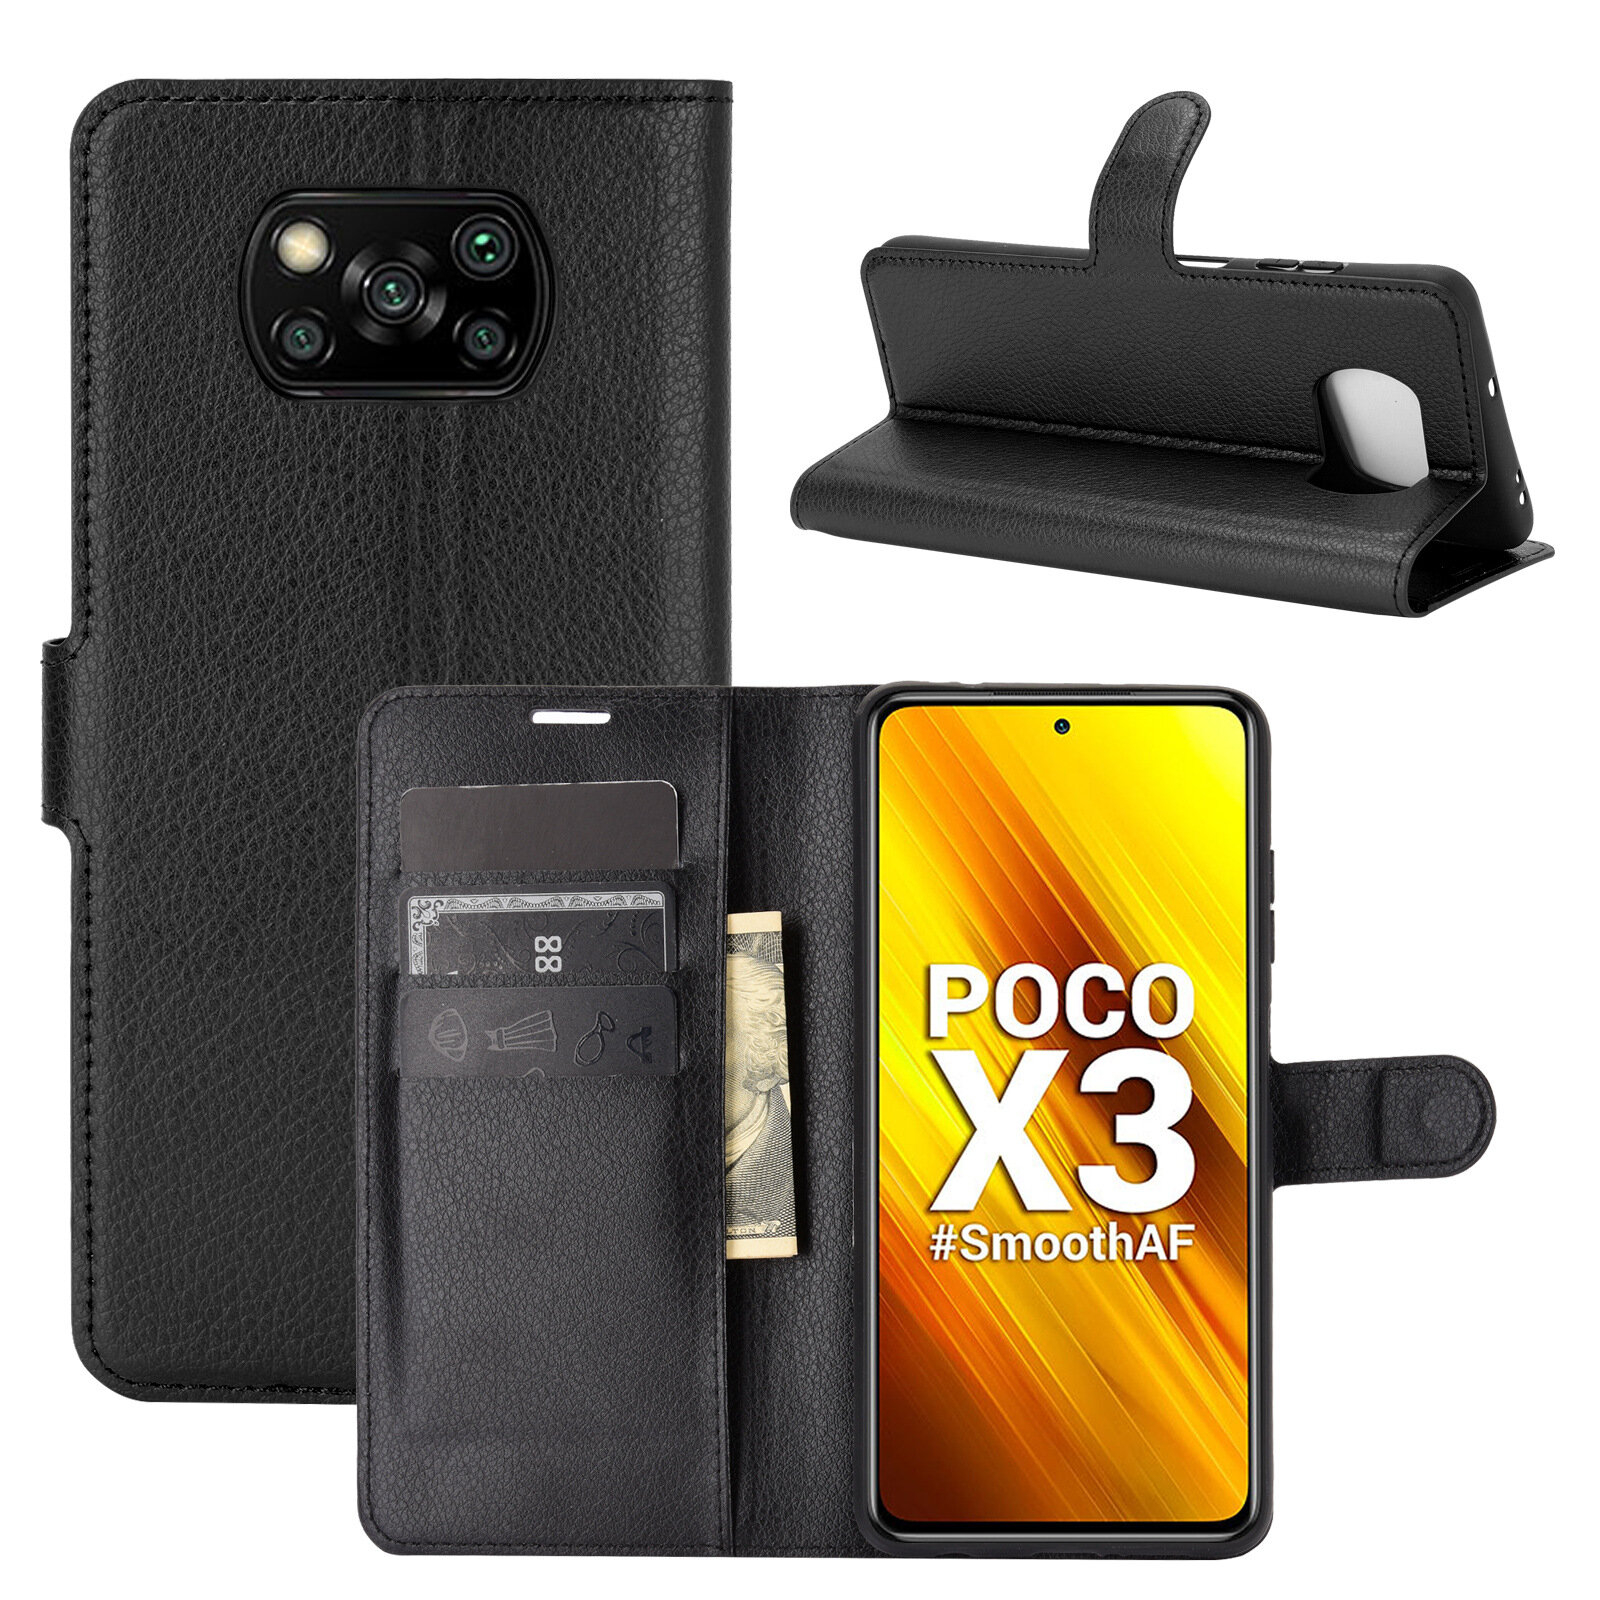 Bakeey for POCO X3 PRO / POCO X3 NFC Case Litchi Pattern Flip Shockproof PU Leather Full Body Protec